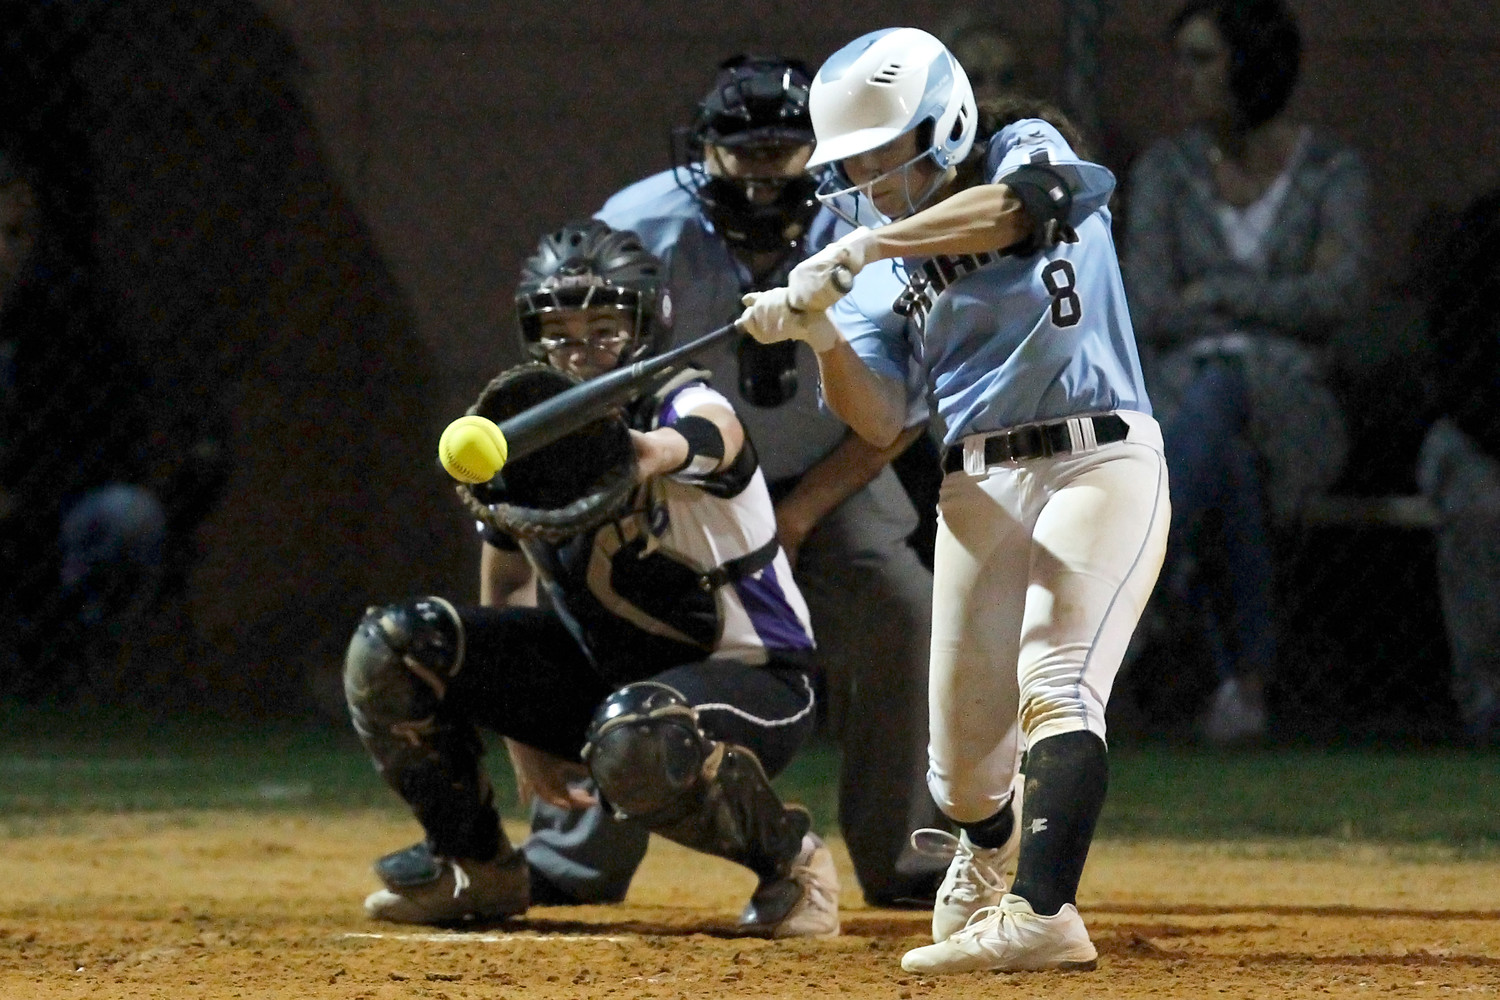 Michelle Leone smacks a solid base hit.